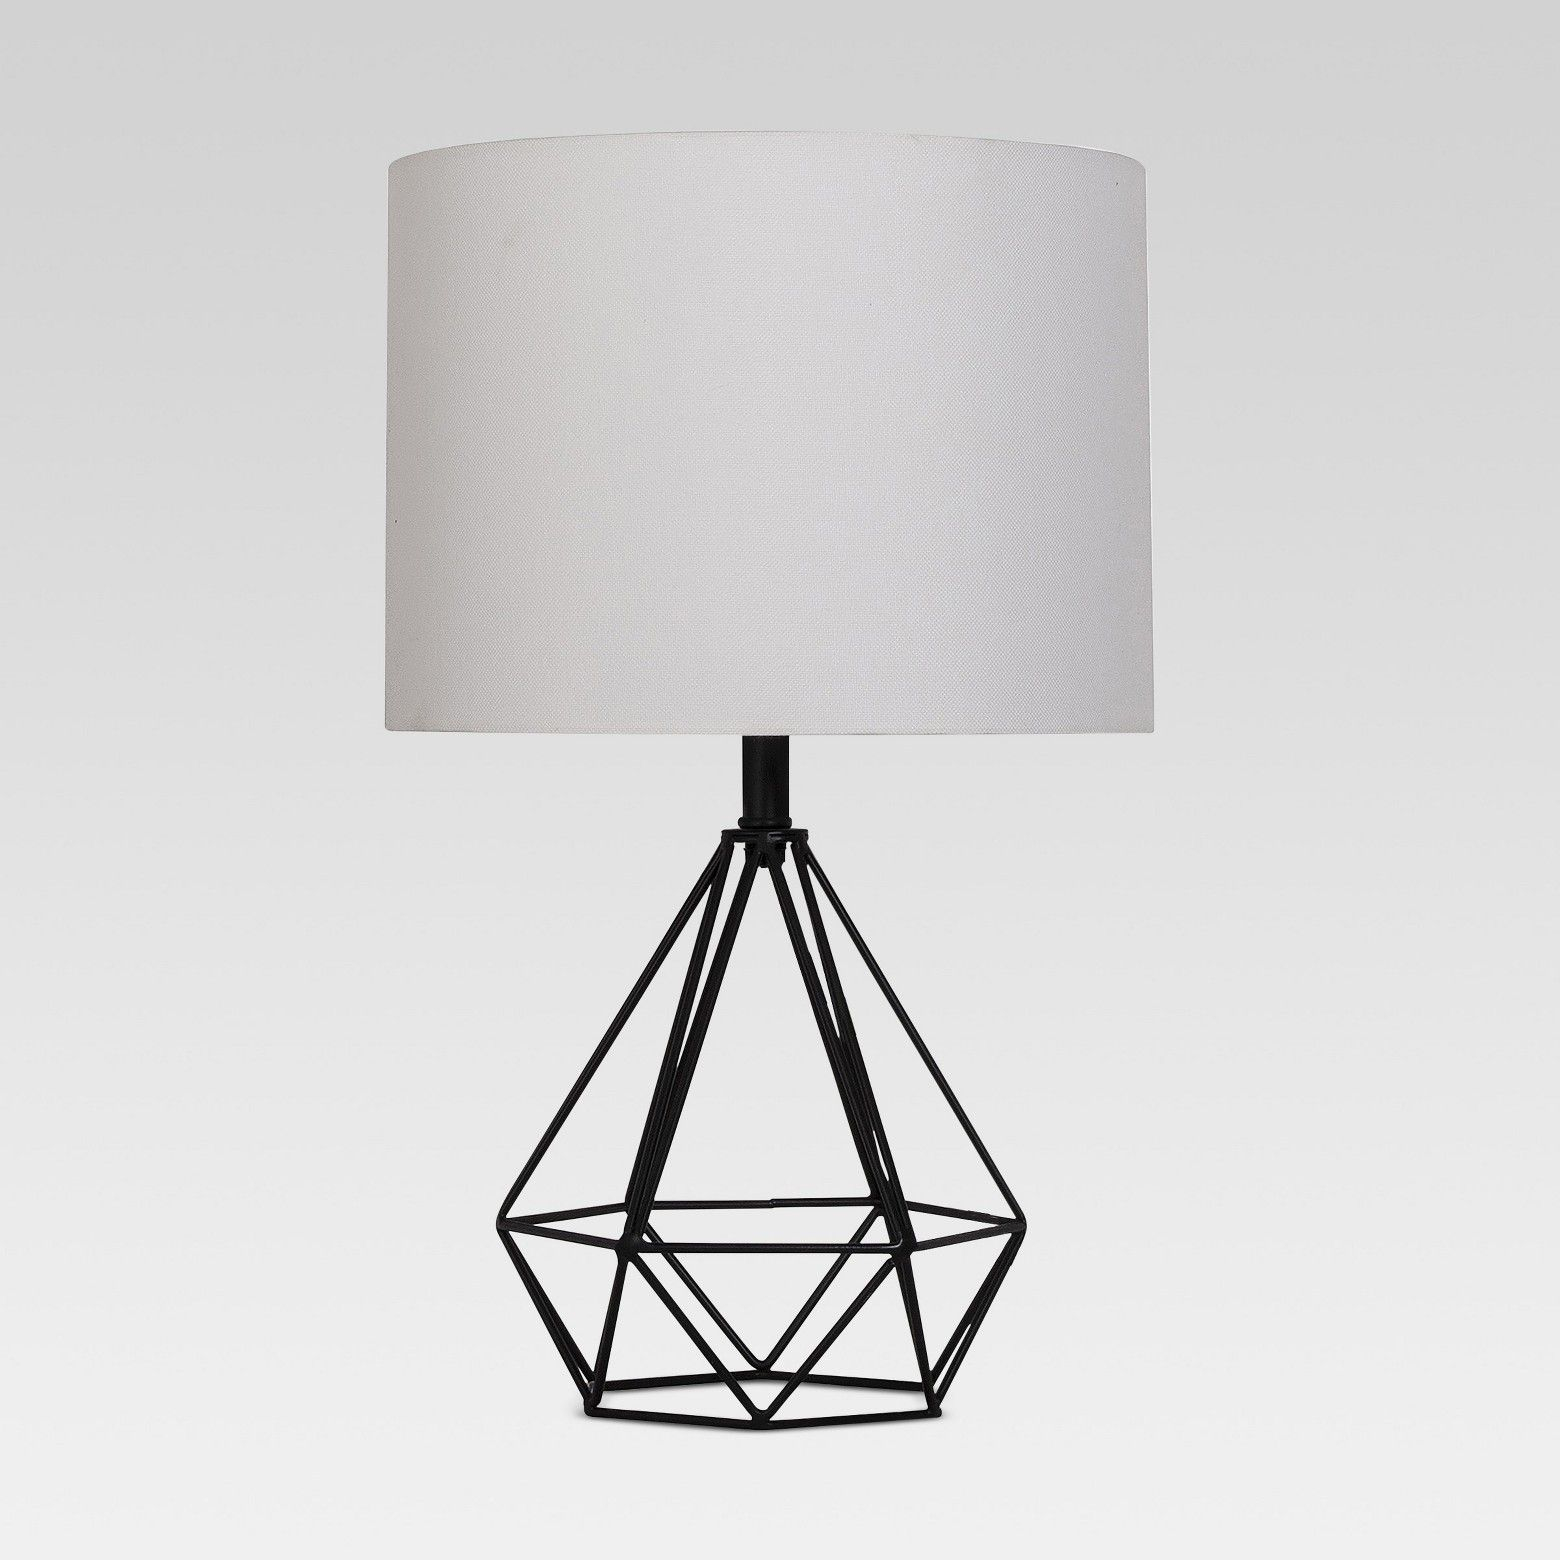 Entenza Wire Geometric Table Lamp Project 62 Geometric pertaining to size 1560 X 1560